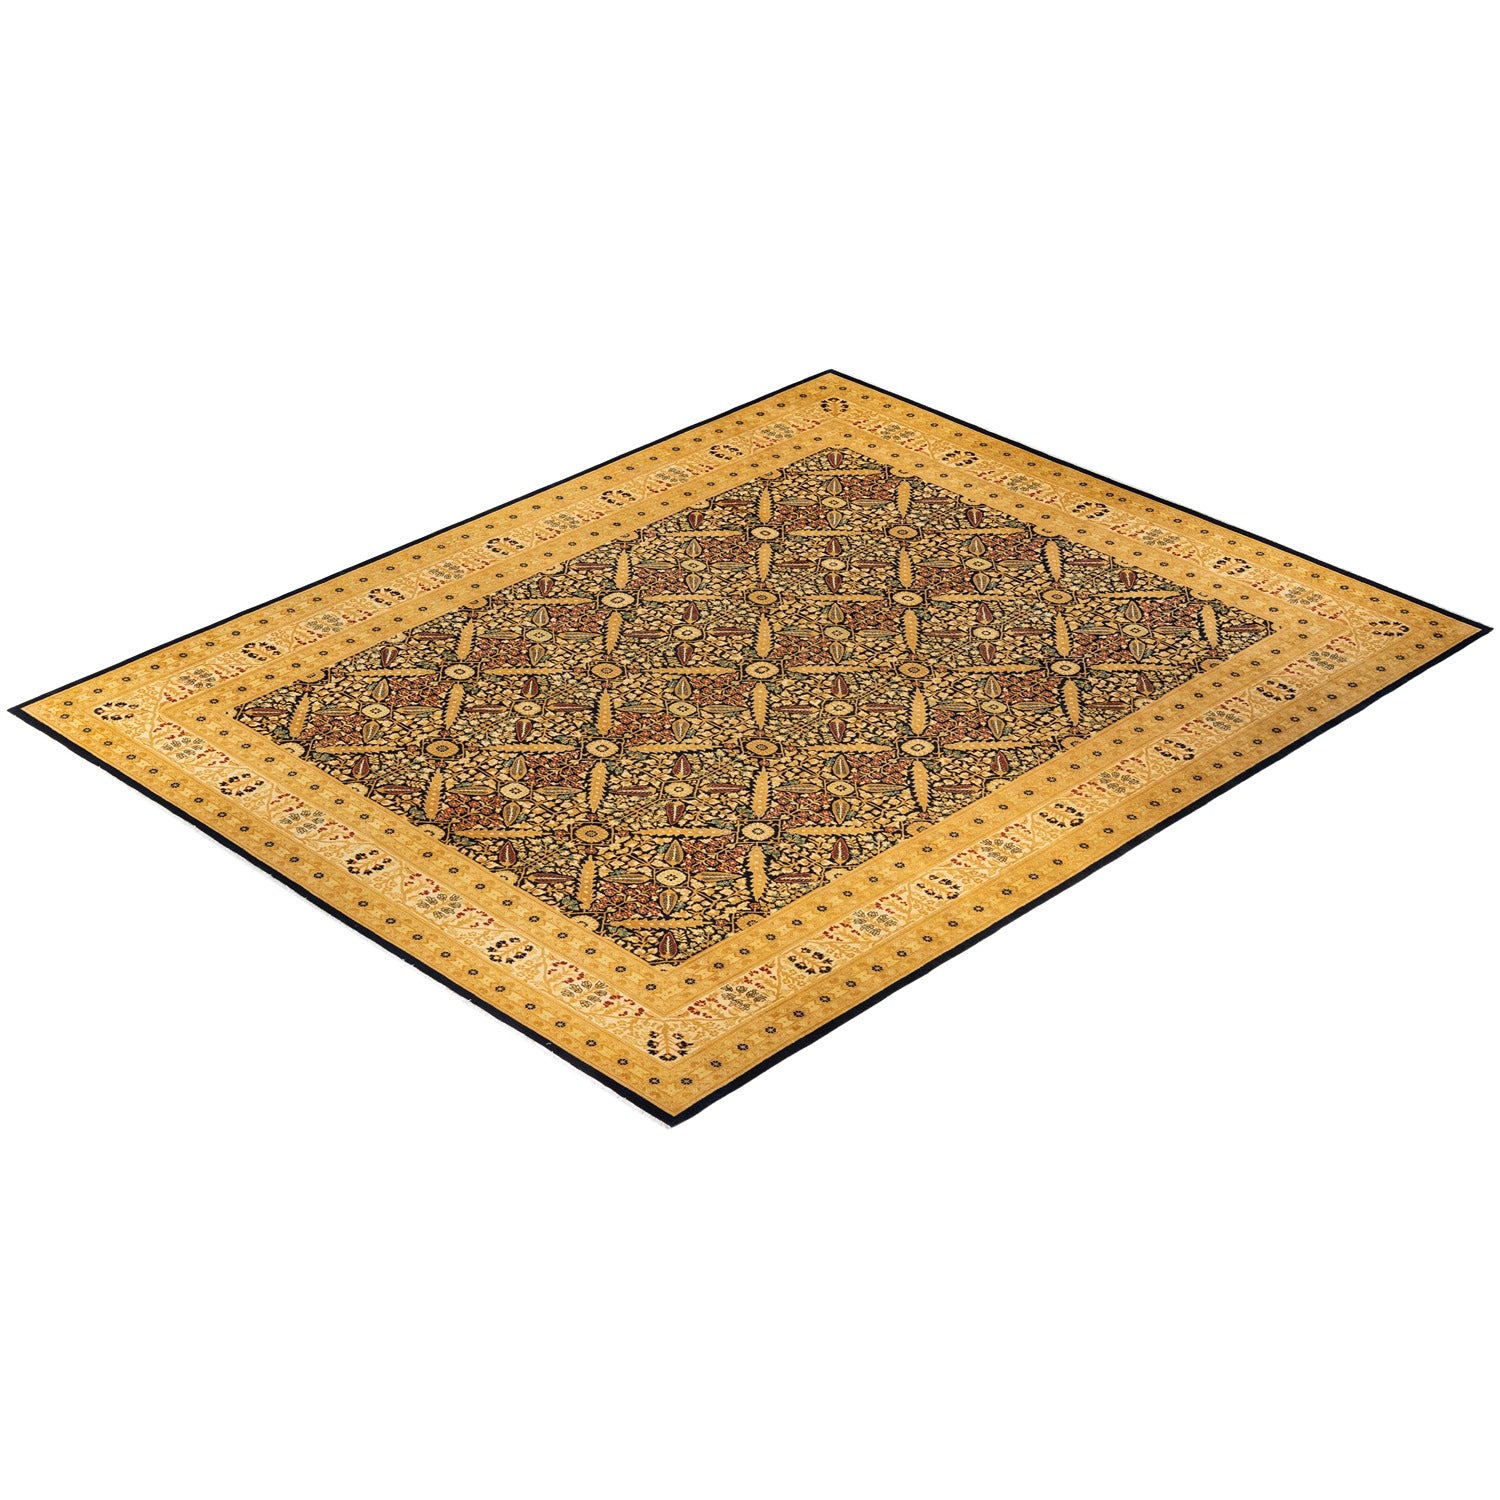 Ornate diamond-shaped rug with complex geometric and floral motifs.